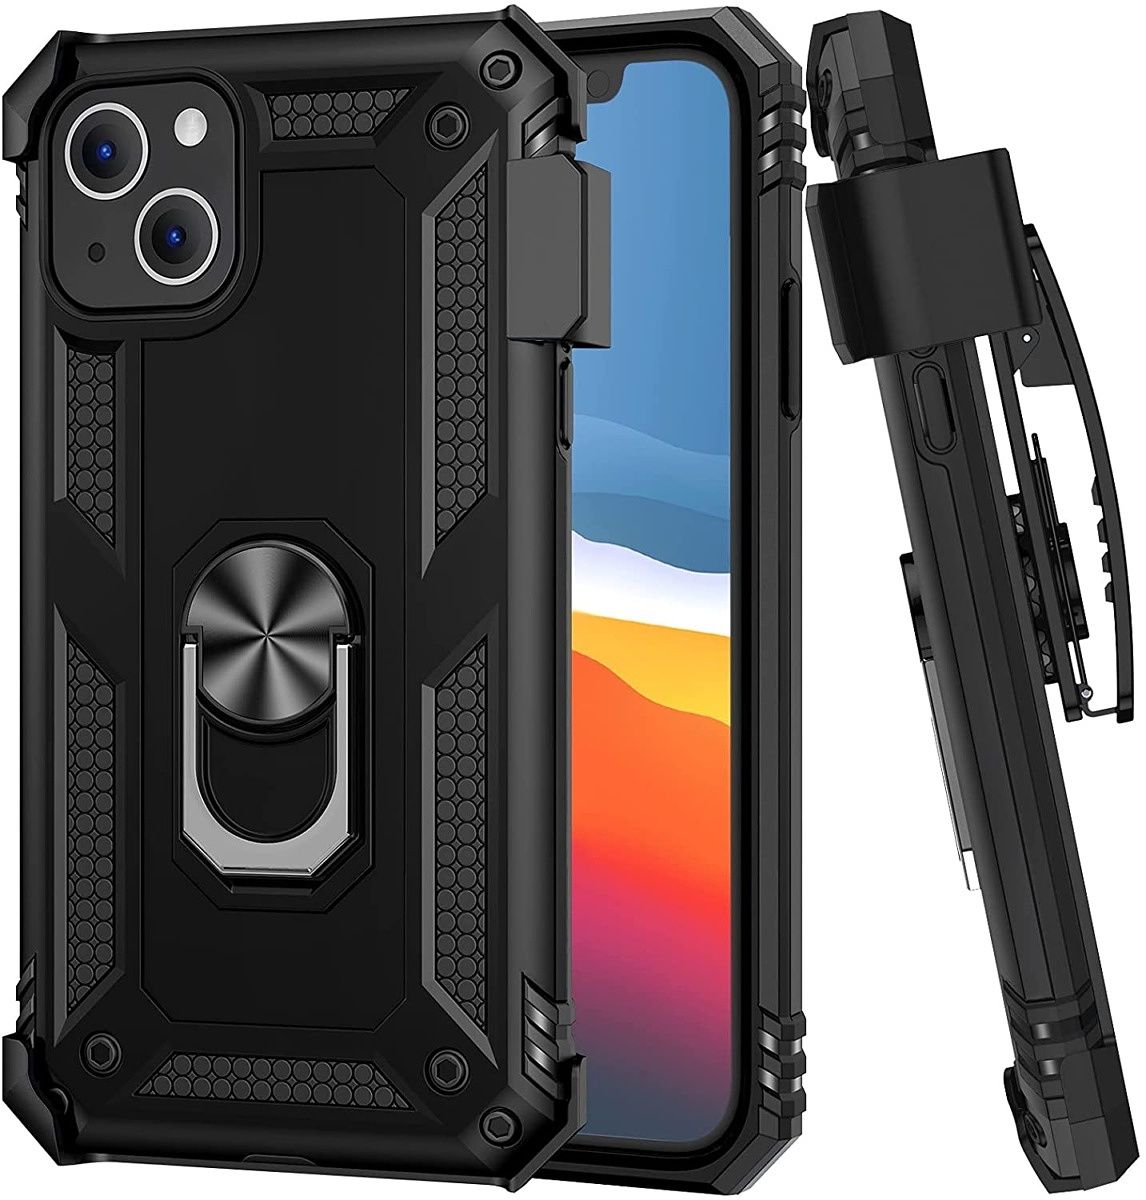 This is a rugged case with extreme protection that also happens to have a kickstand built-in. There's also a belt holster you can use to clip the phone when not in use.